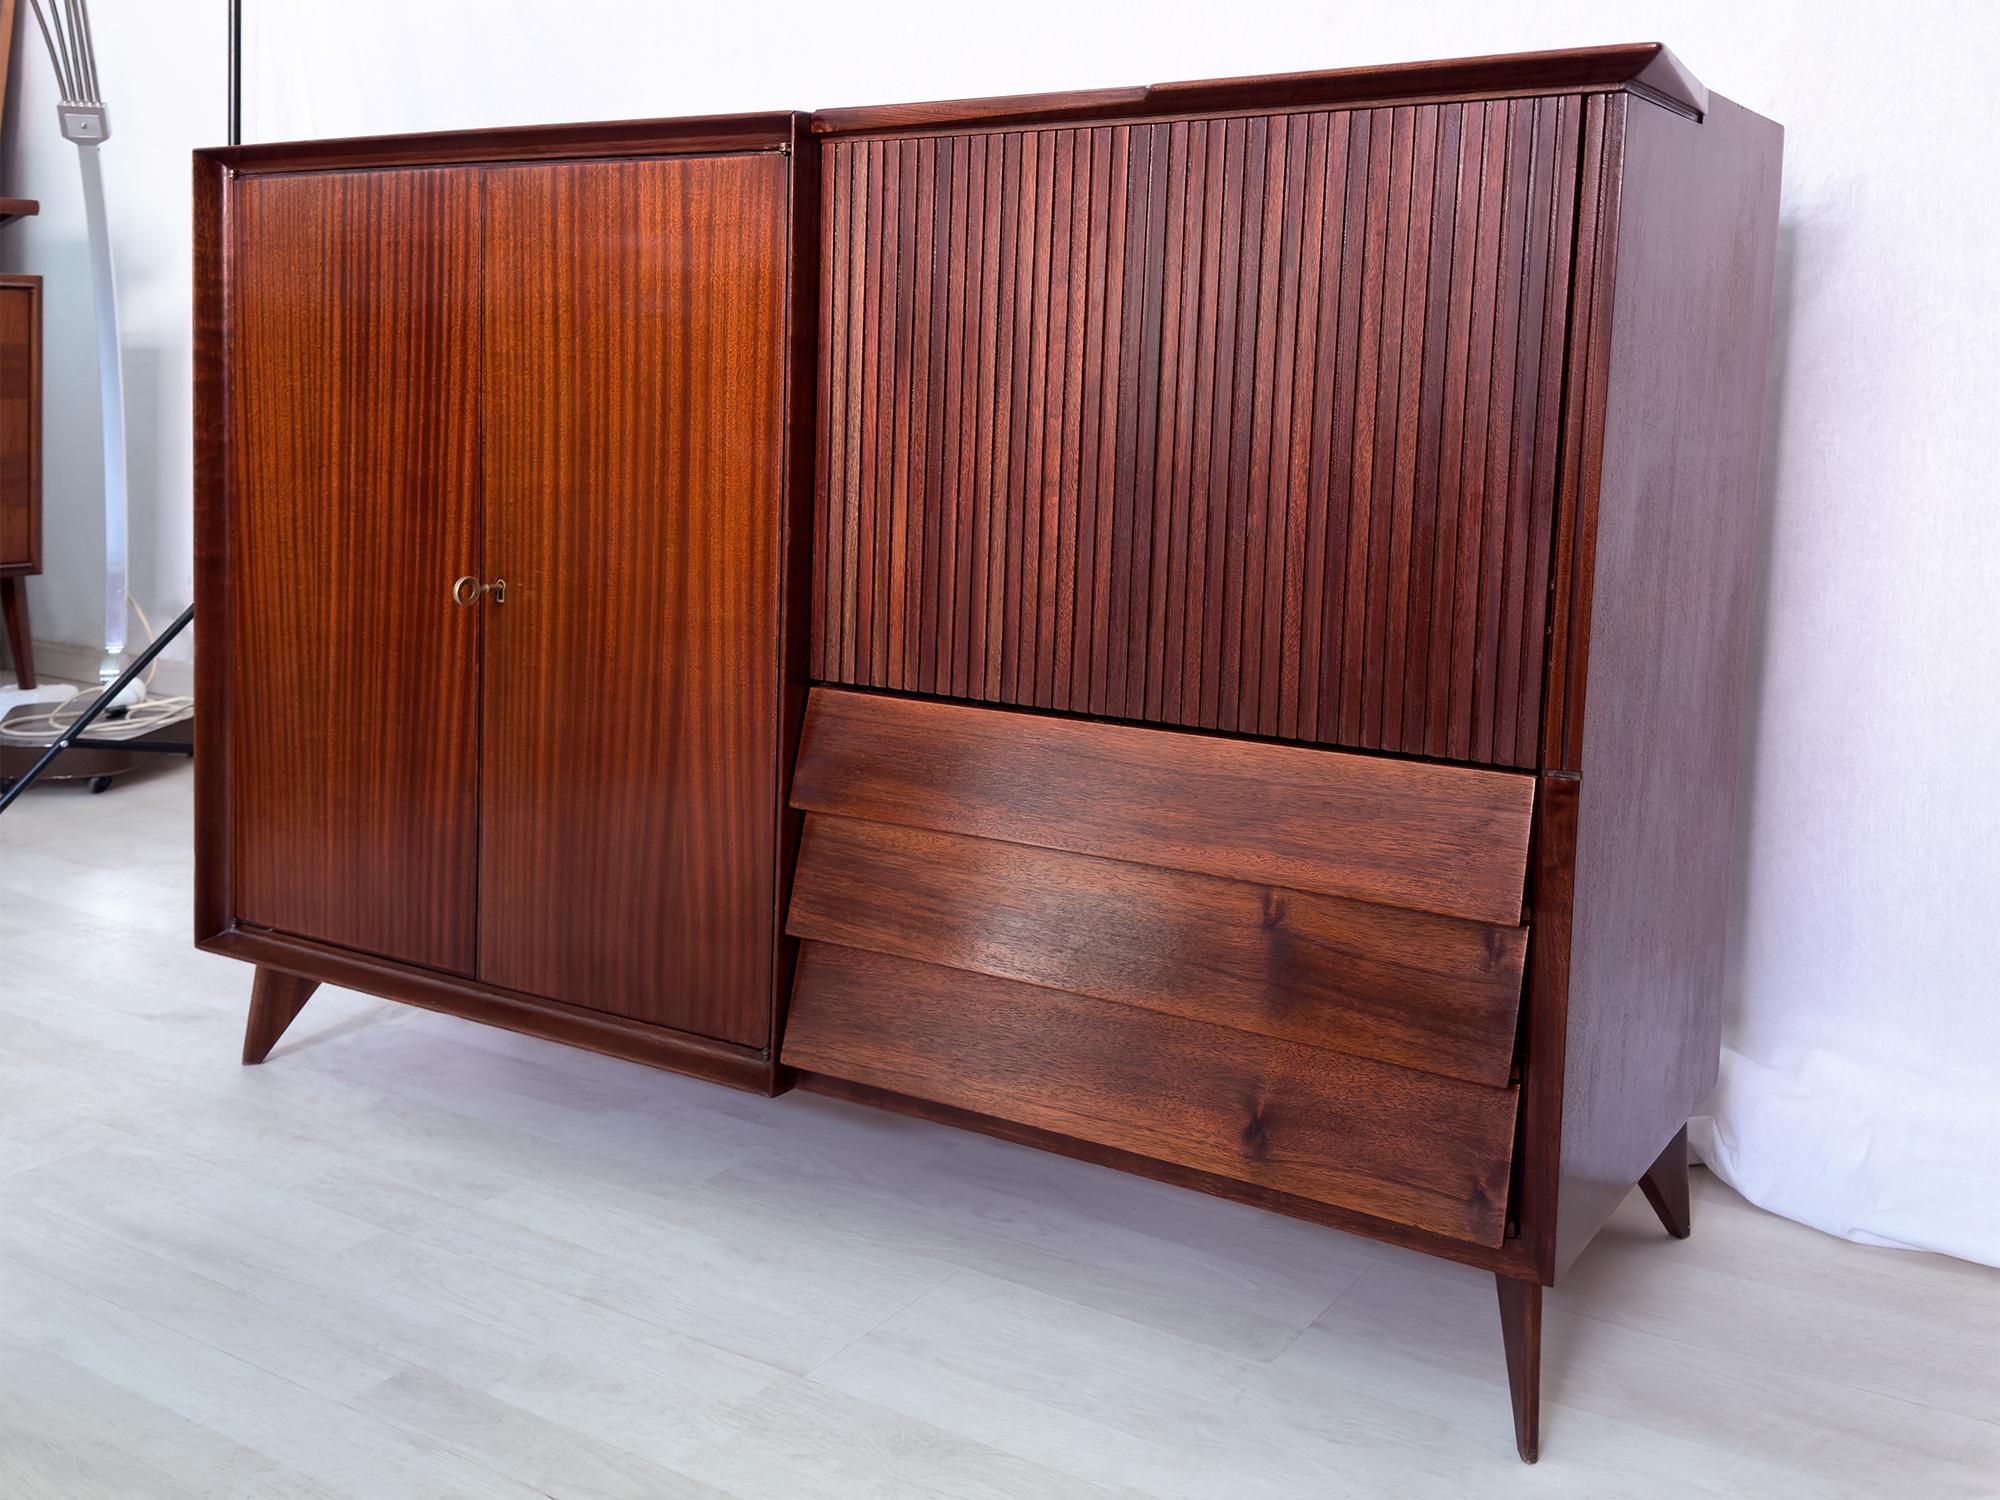 Brass Italian Mid-Century Teak Wood Sideboard with Bar Cabinet by Vittorio Dassi, 1950s For Sale